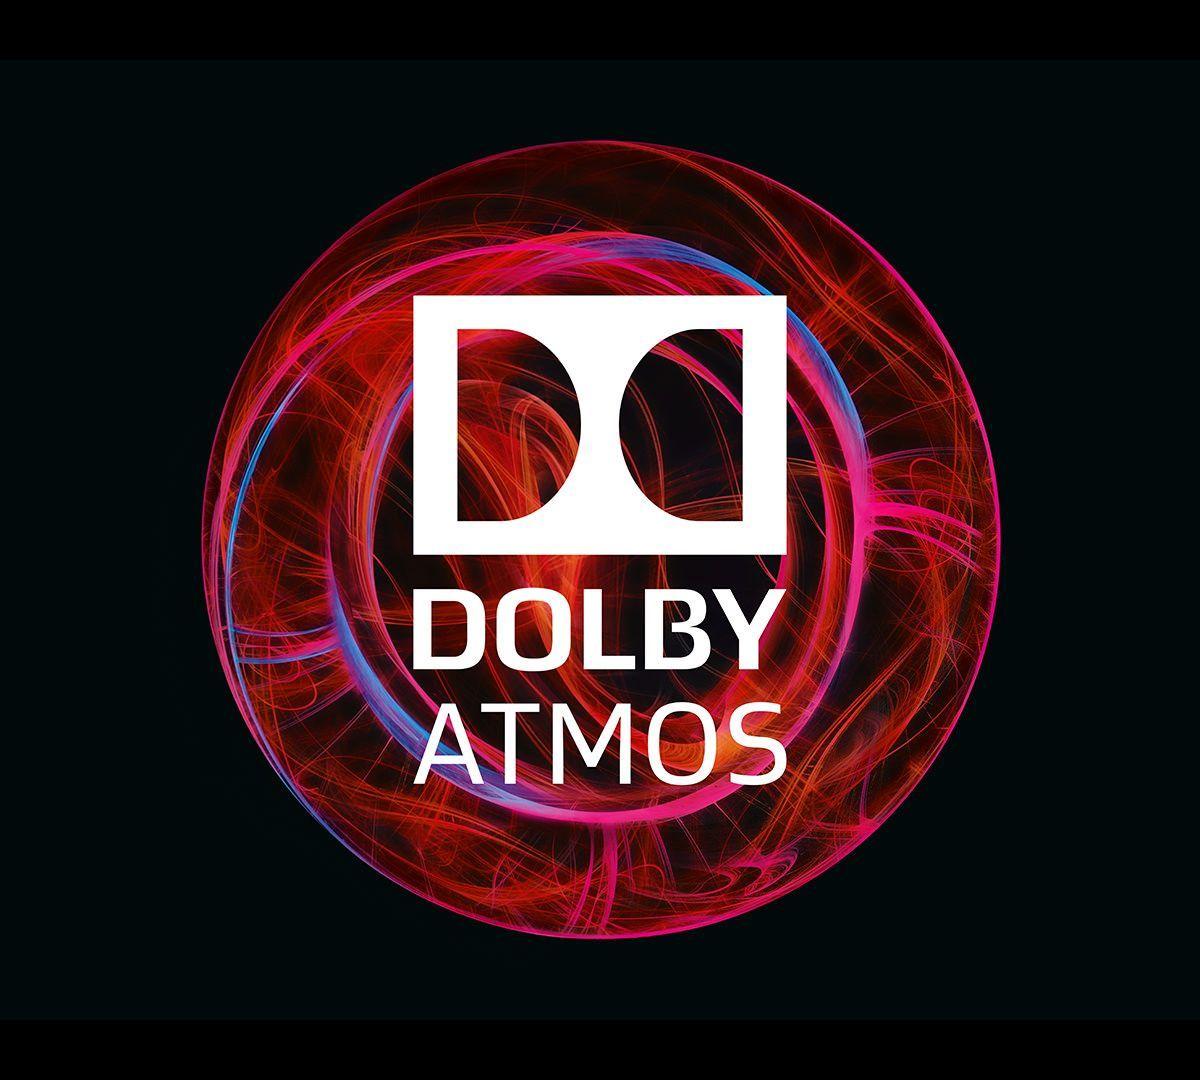 Dolby Atmos Logo - Dolby Atmos illustrations. Dolby. Dolby atmos